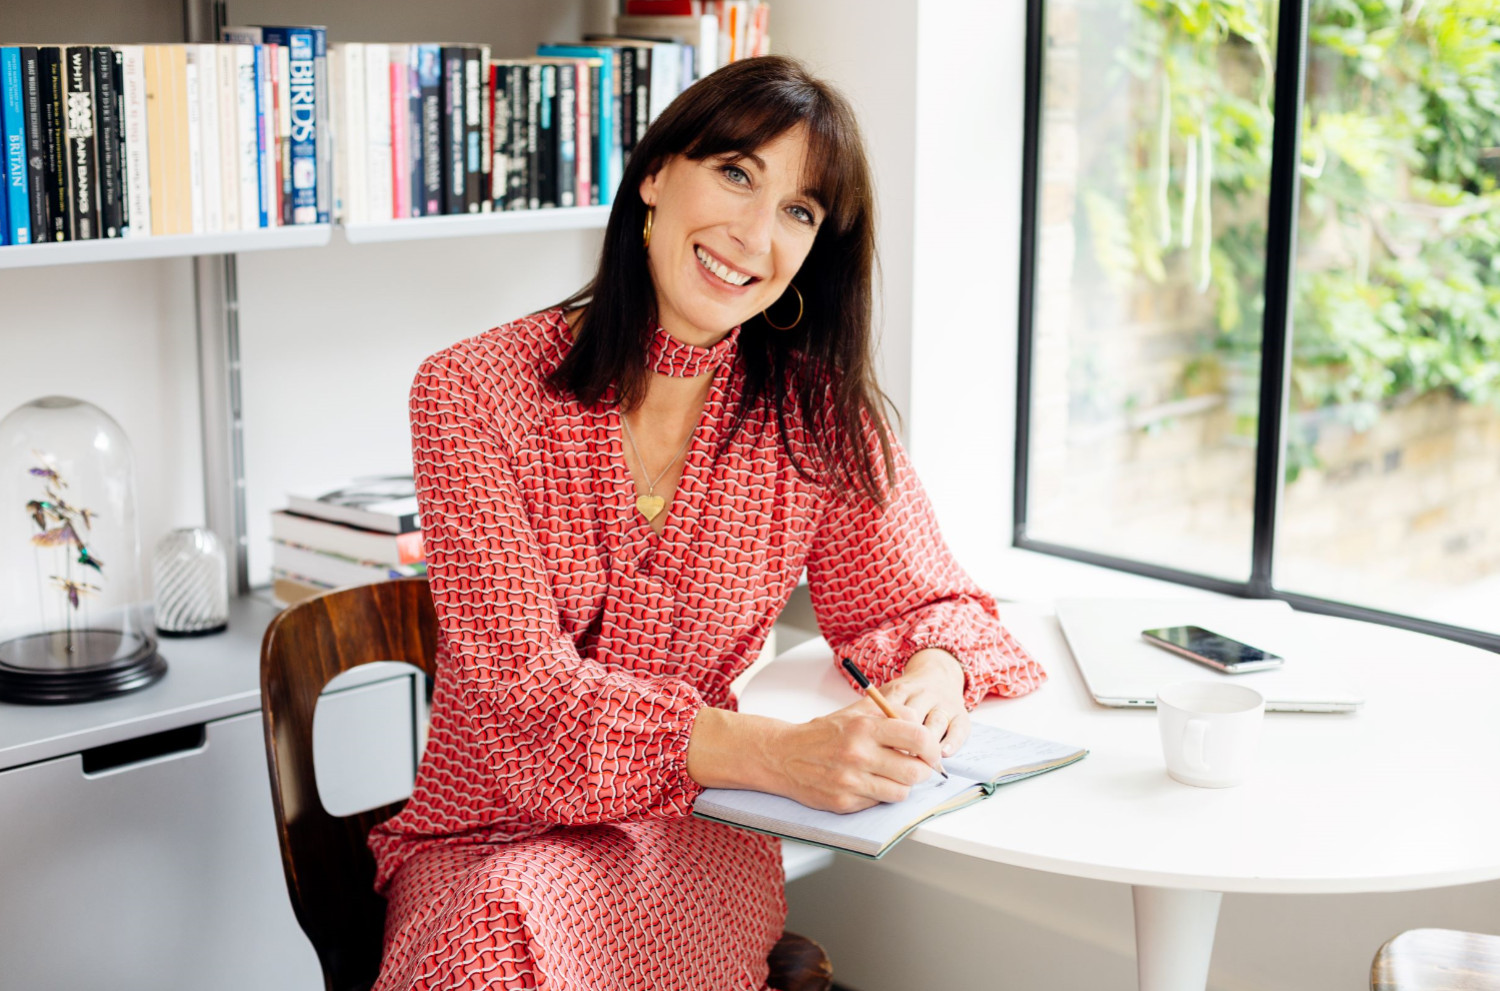 Revitalise team up with samantha cameron’s clothing brand to support disabled people during pandemic